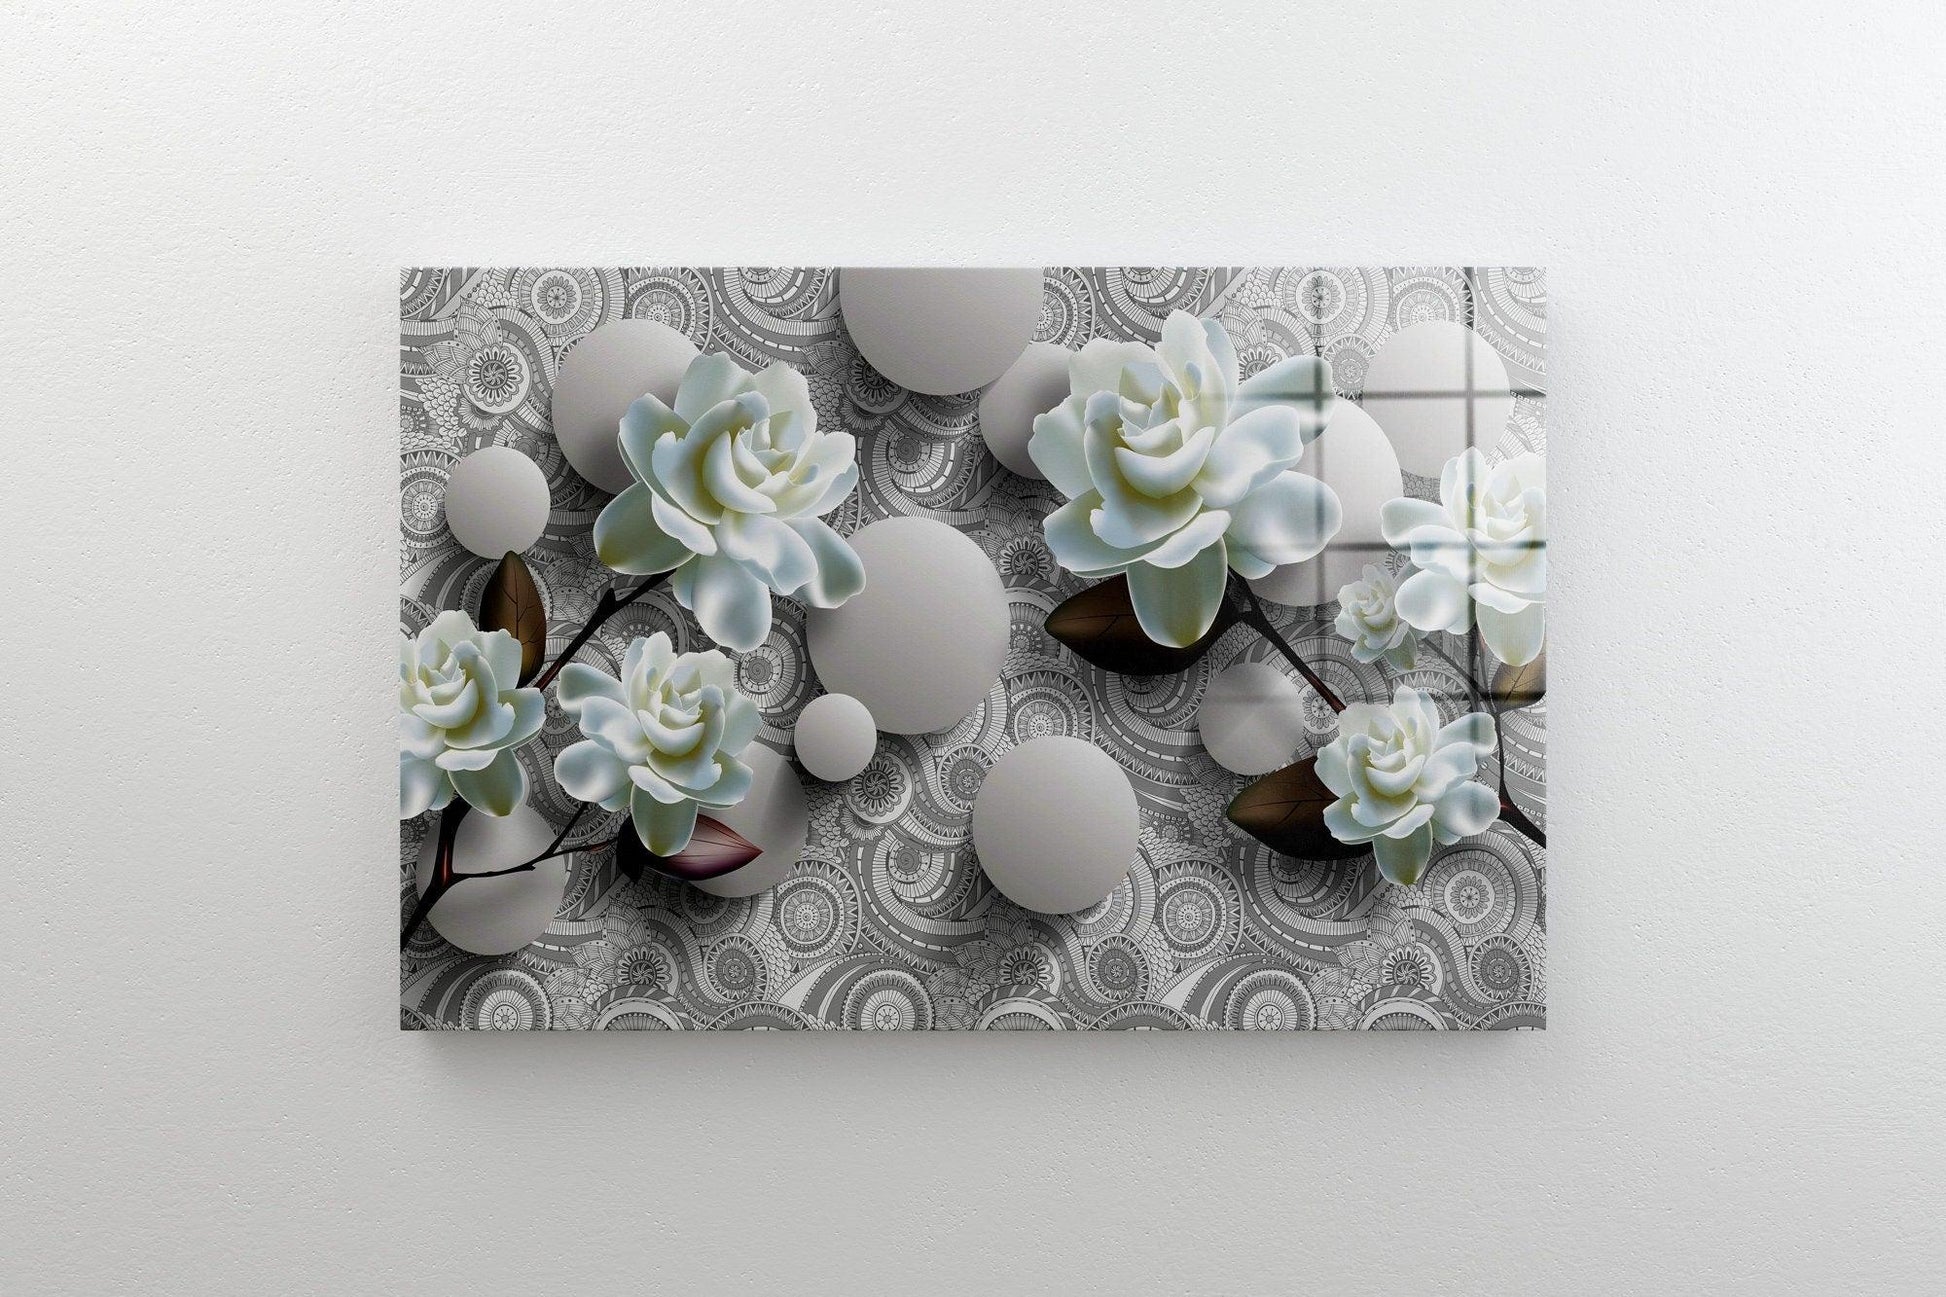 3D White flower Canvas Wall Art, Flowers Wall Hangings, White Canvas Wall Print, Black White Room Decor, Ready to Hang